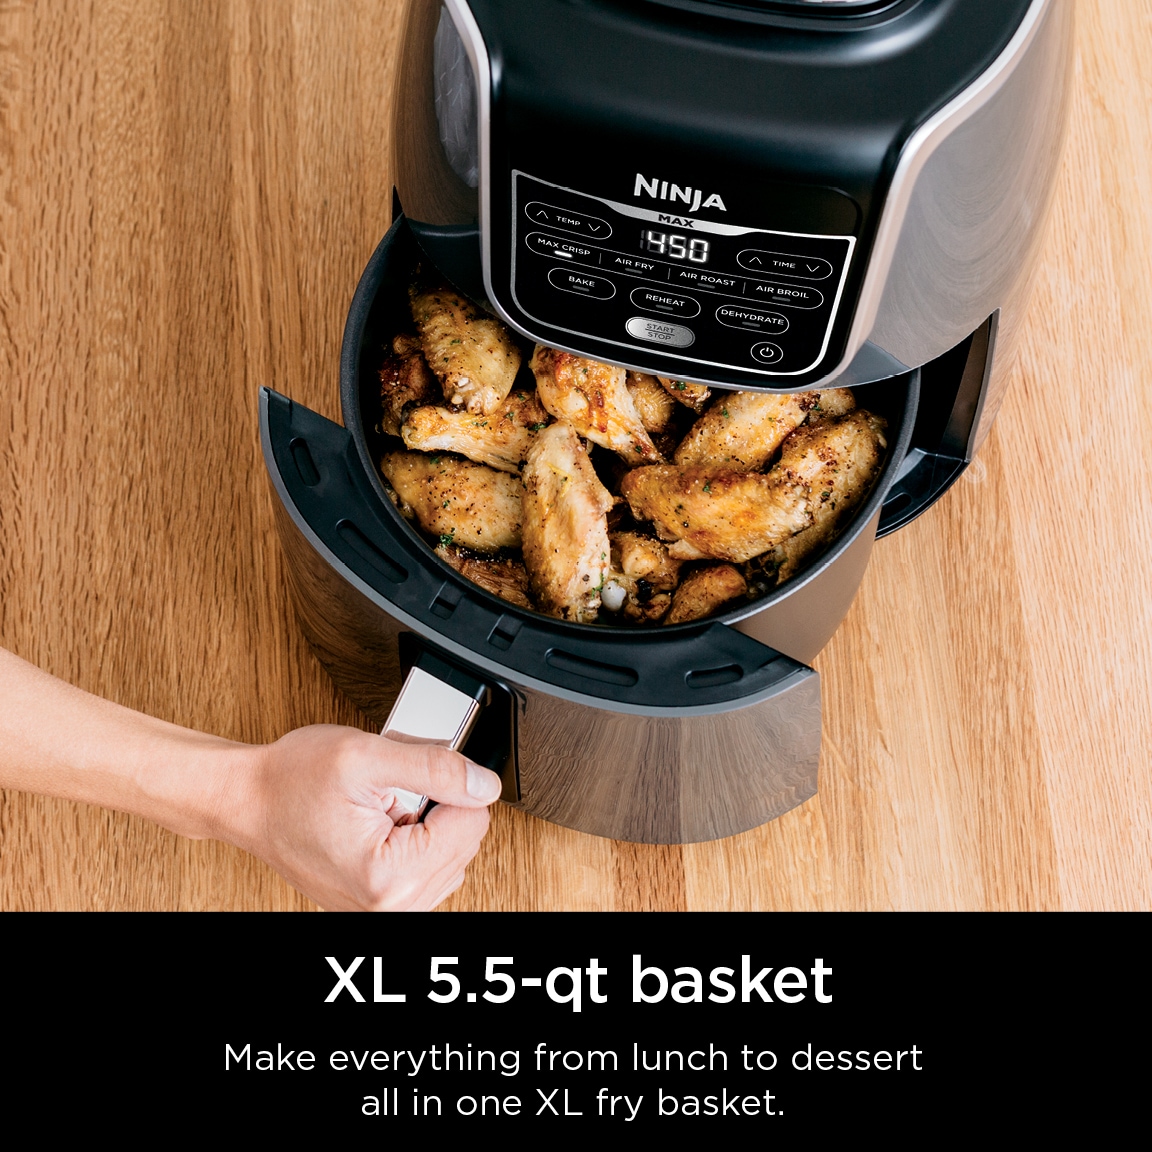 PowerXL Grill Air Fryer Combo 6 qt 12-in-1 Indoor Grill, Air Fryer, Slow Cooker, Roast, Bake, 1550-Watts, Stainless Steel Finish (Standard)